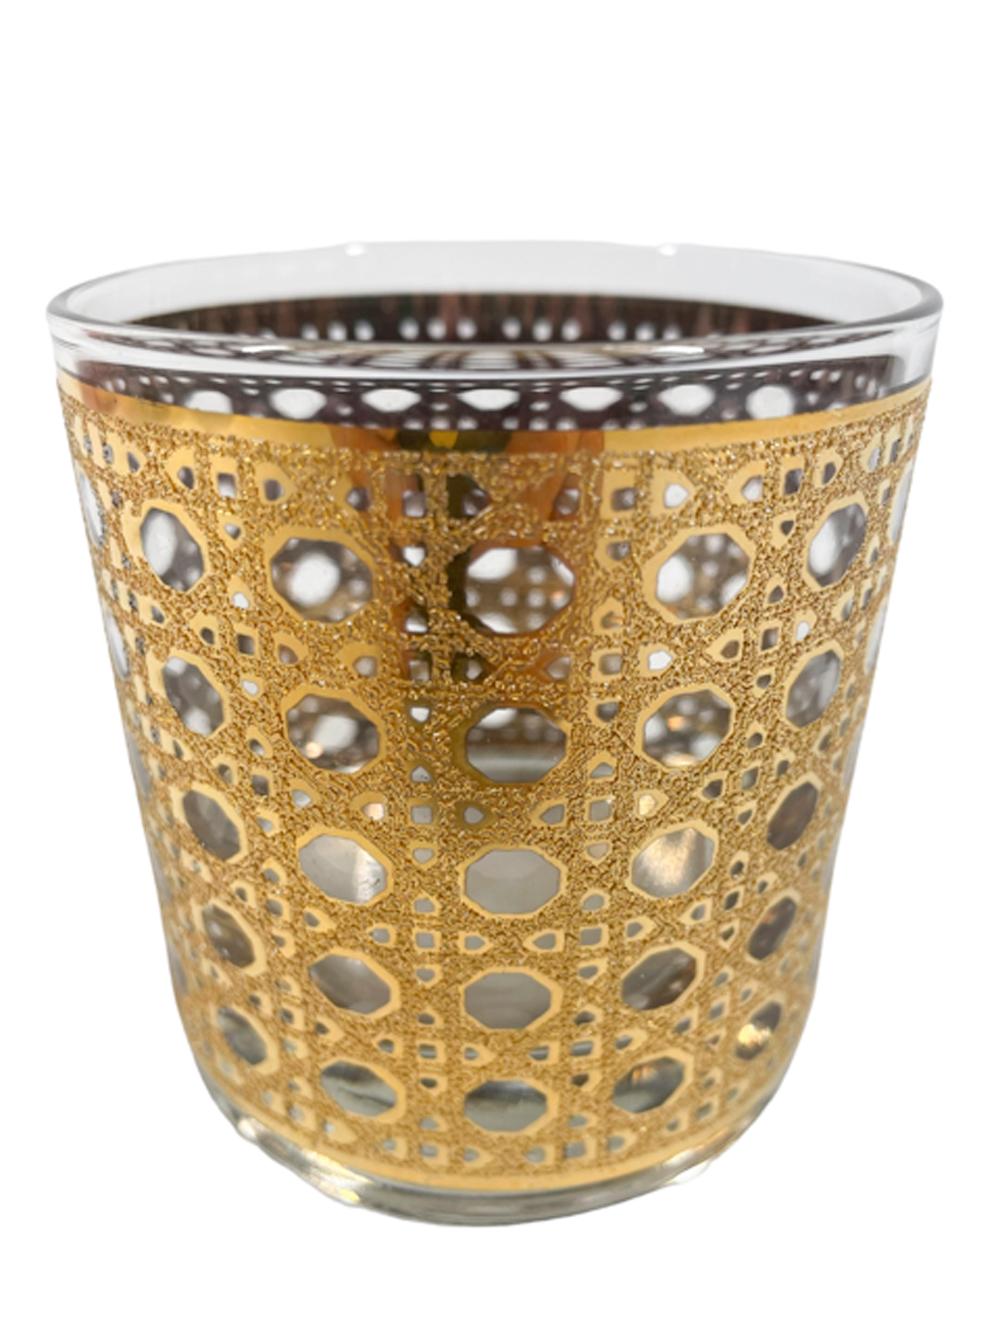 Four Mid-Century Modern rocks glasses by Culver, LTD with an allover woven cane pattern in 22 karat gold with a raised, textured surface.